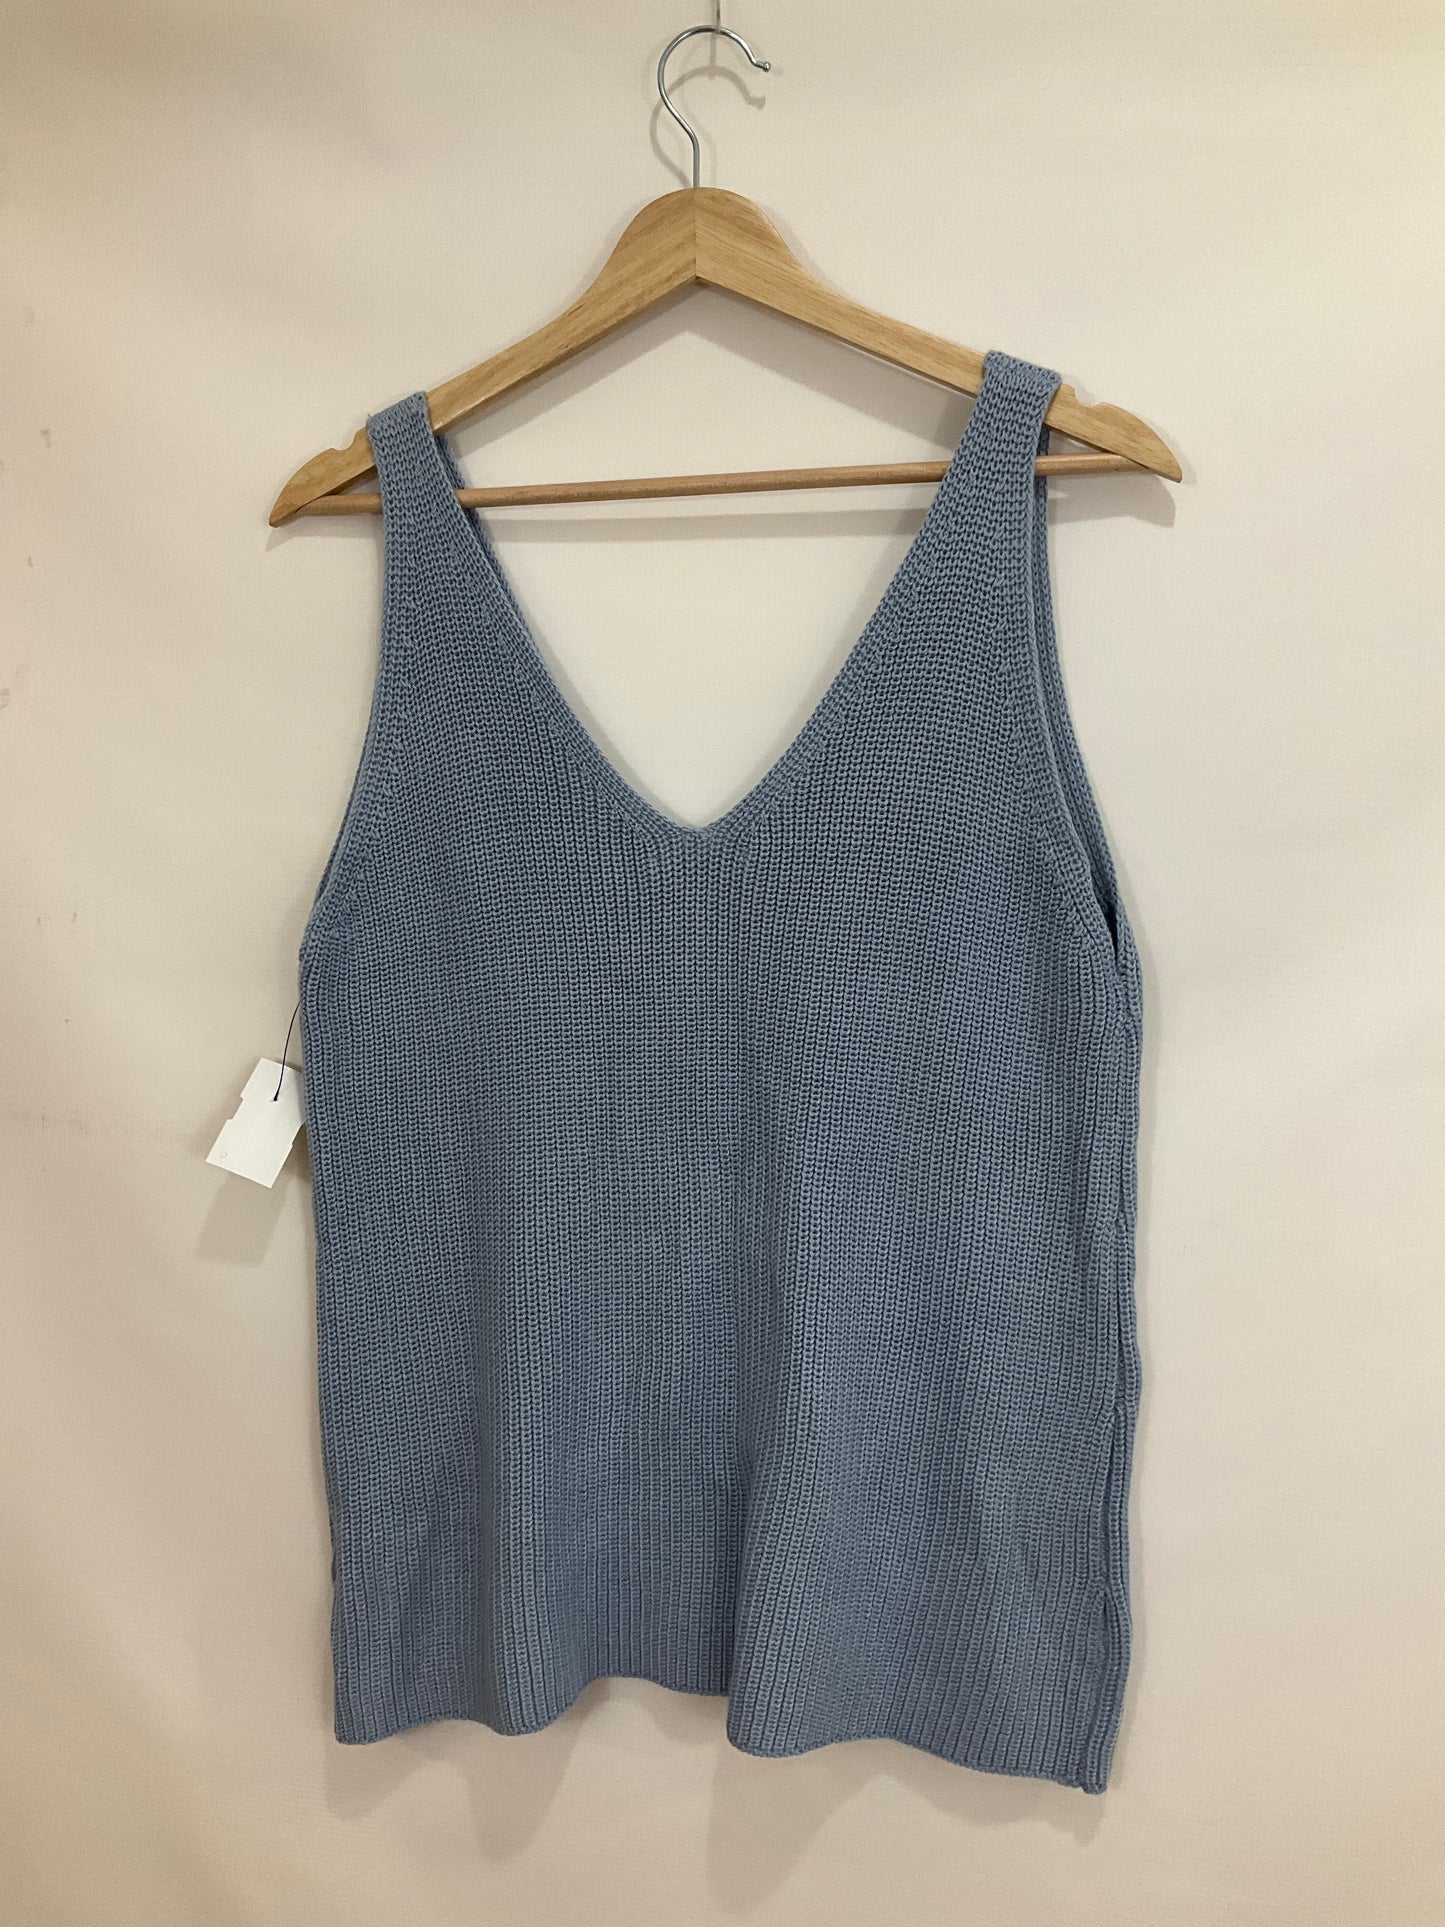 Vest Sweater By Gilli  Size: S